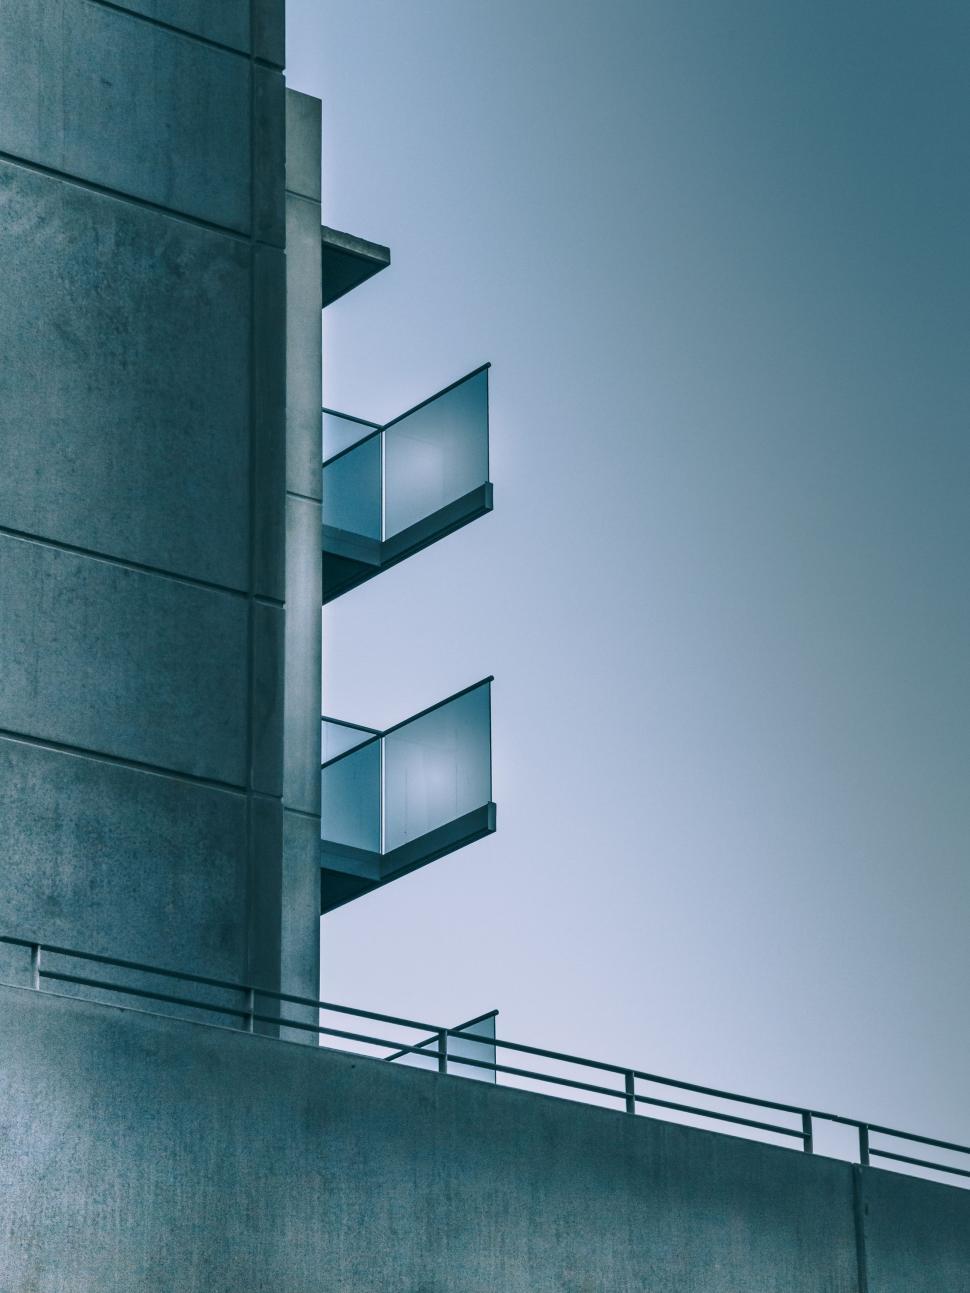 Free Image of Modern Building With Balconies 